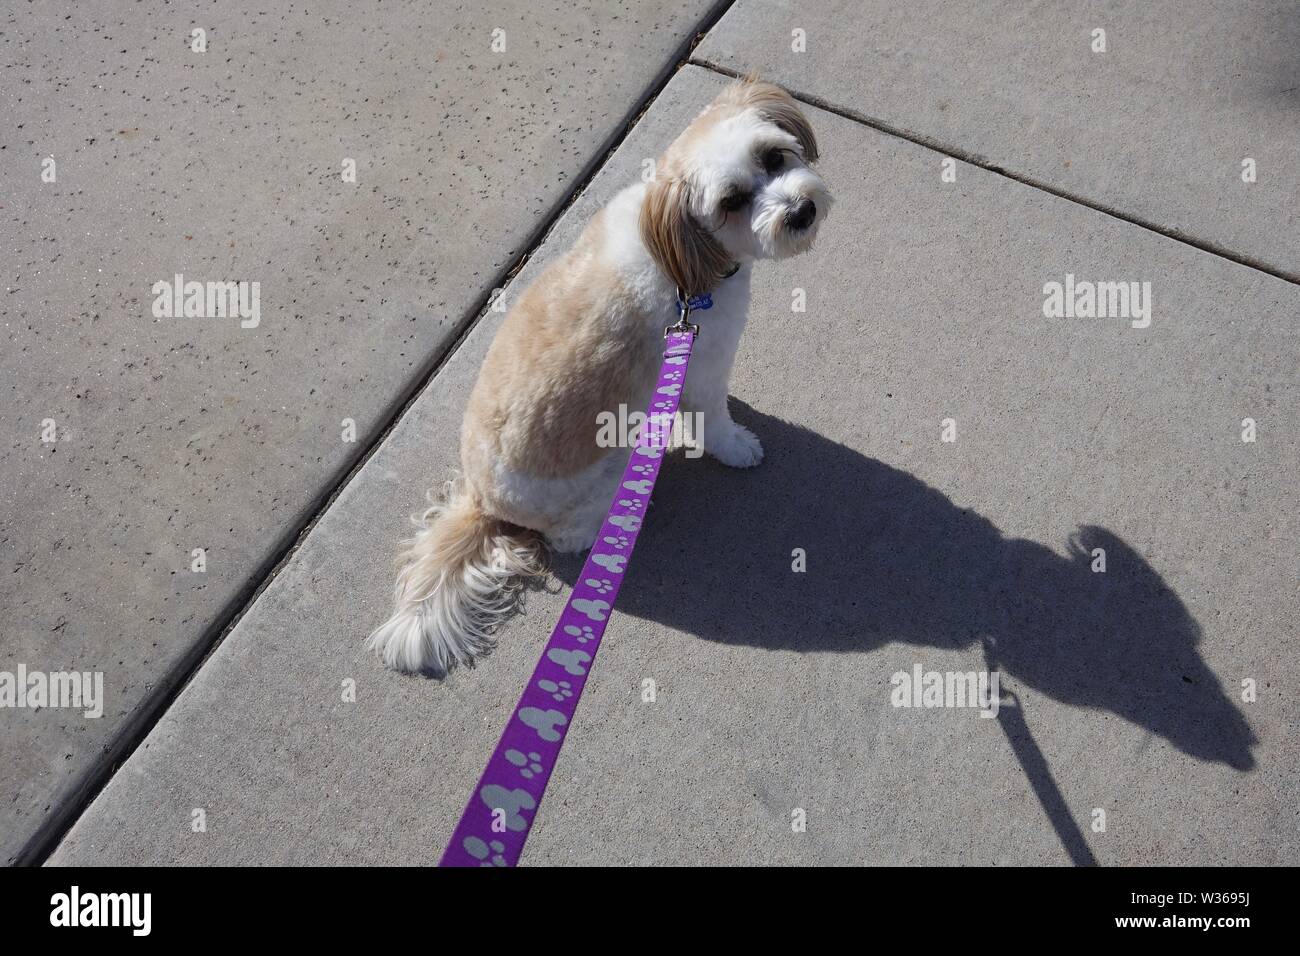 A dog looks back while going for a walk. Stock Photo